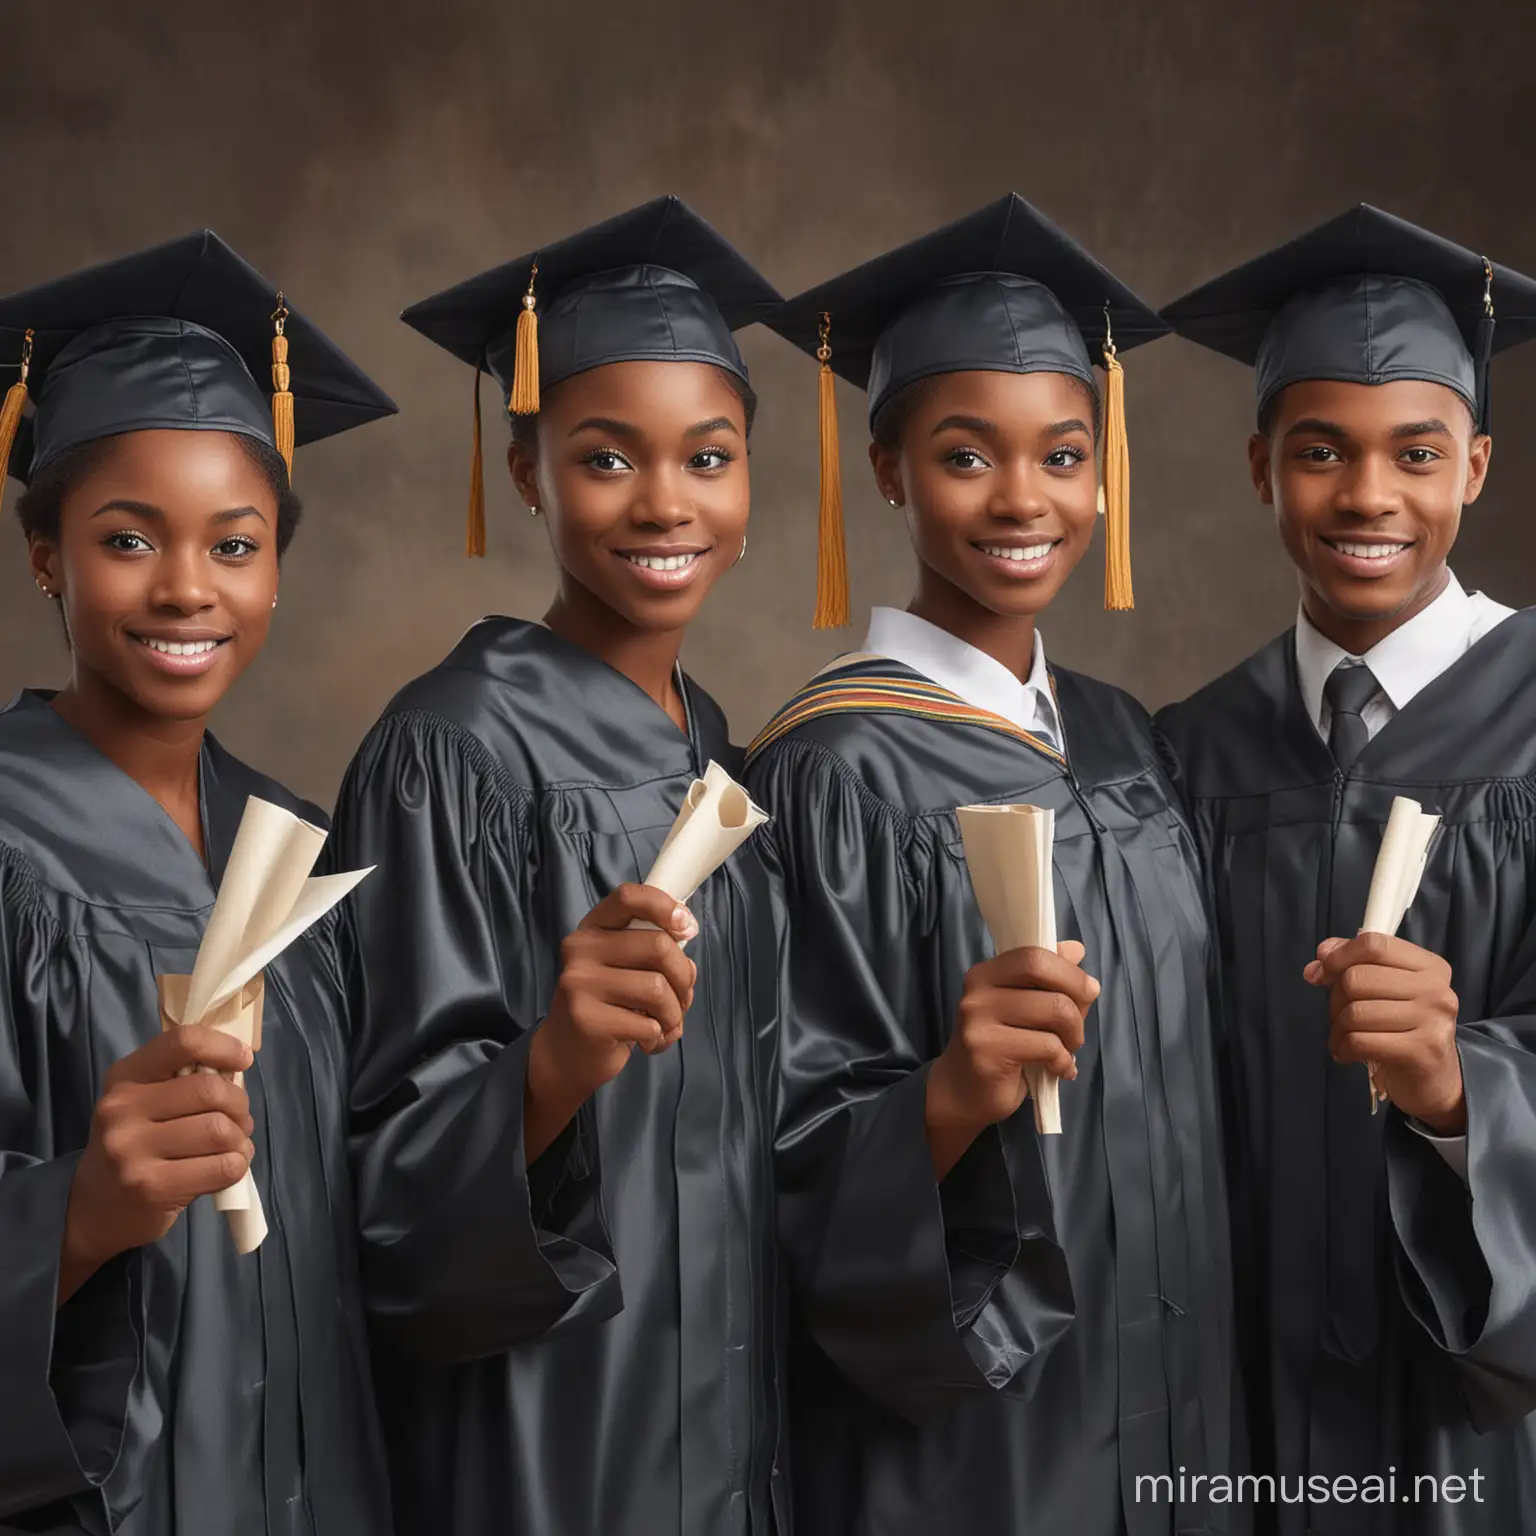 Highly detailed and hyper realistic image of a group of African American high school graduates with normal eyes and hands wearing caps and gowns and holding diplomas in their hands